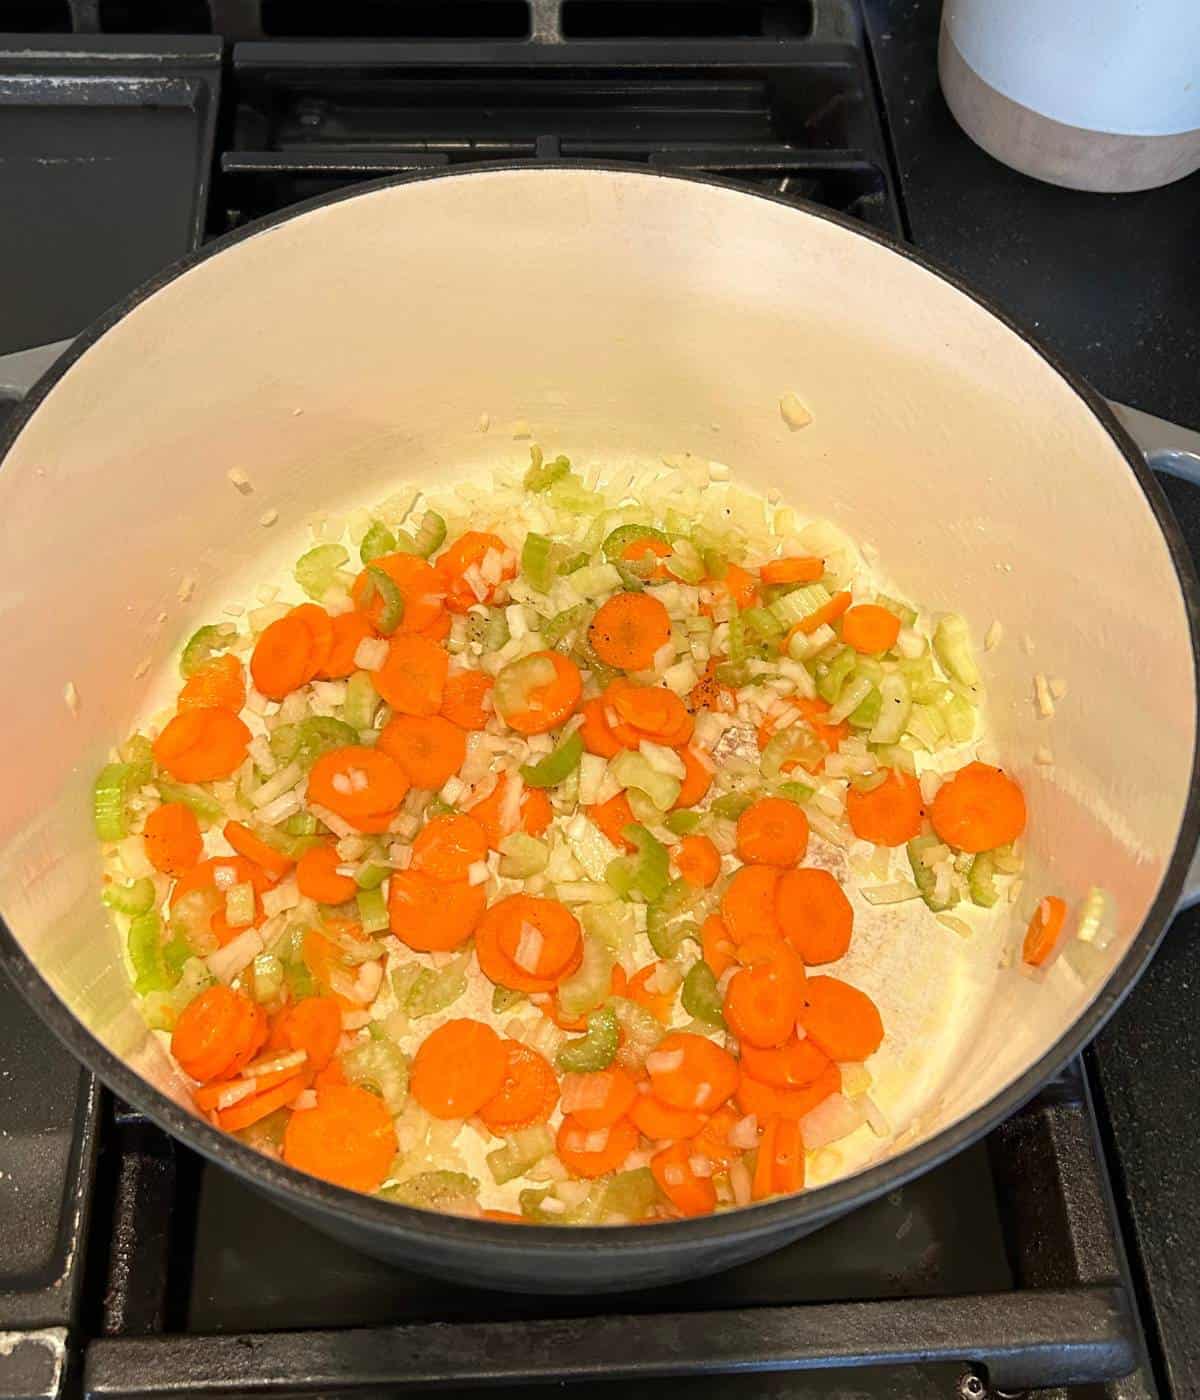 Cooking mirepoix of carrot, celery and onion in pot.